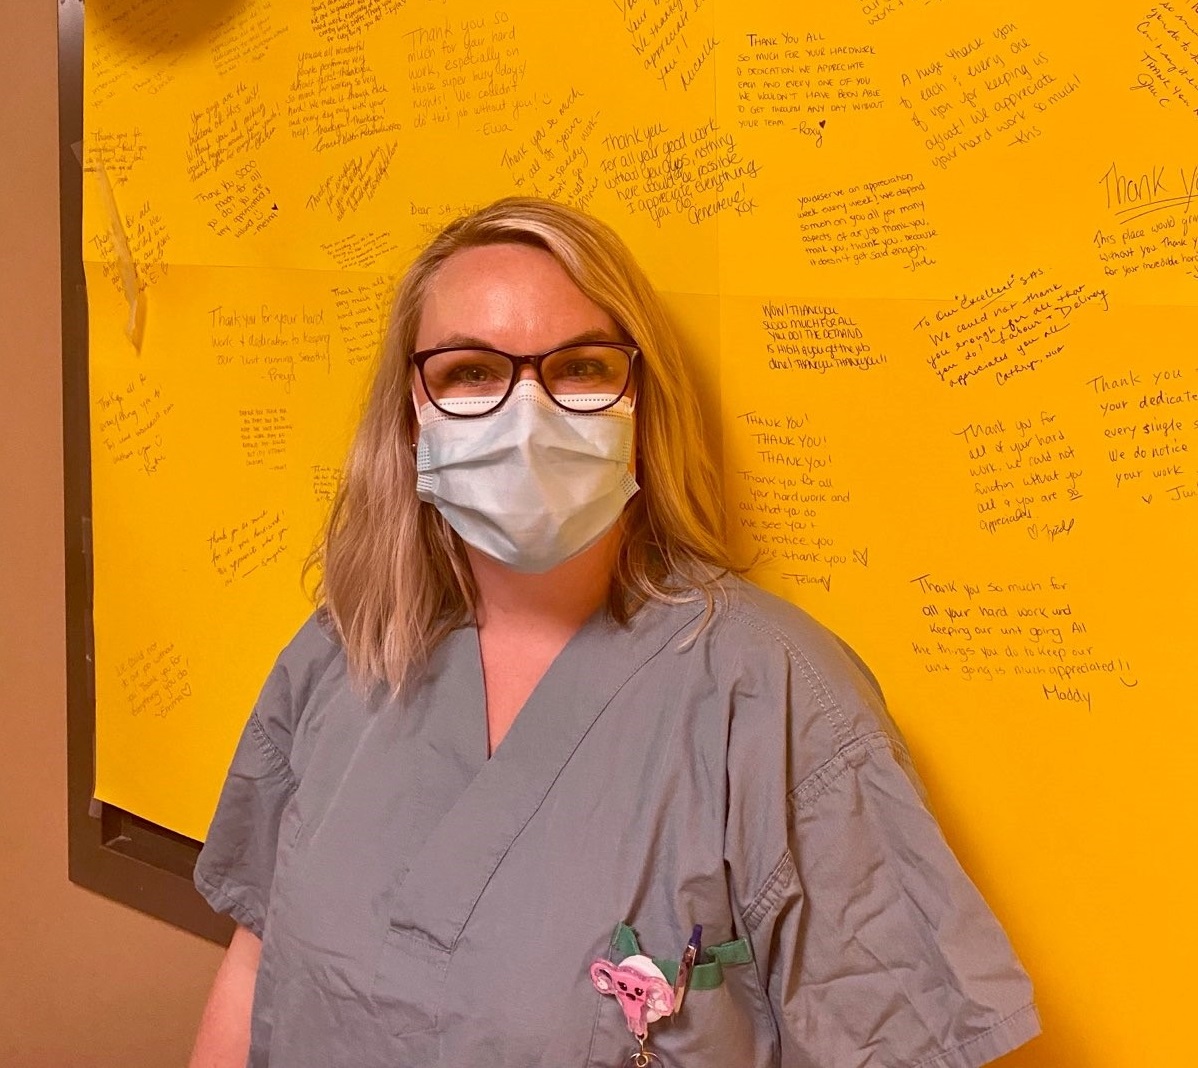 A health care worker wearing scrubs and a surgical mask stands in front of a large bright yellow poster on the wall. The poster has handwritten thank you messages on it